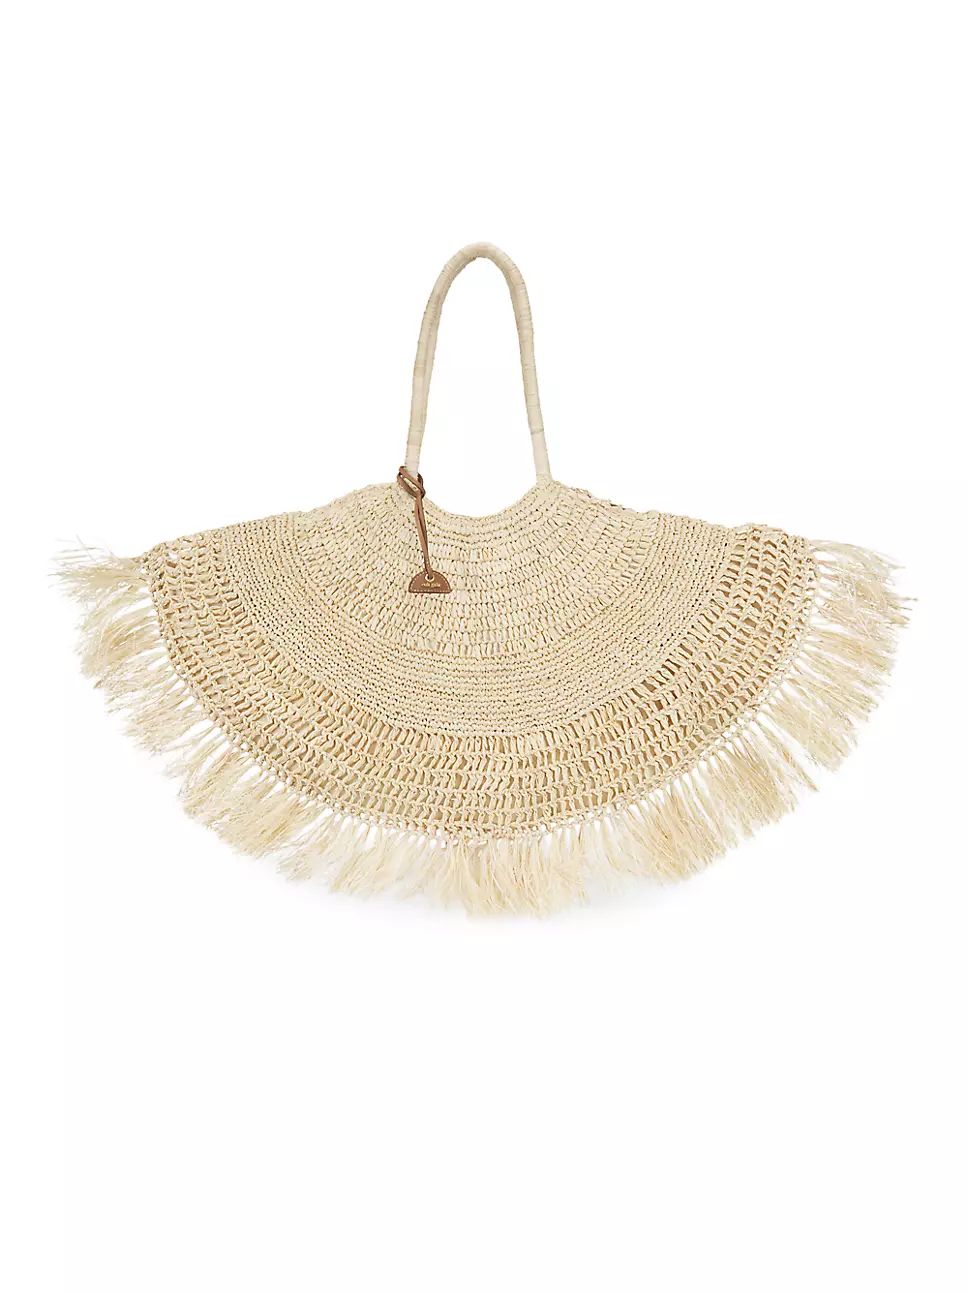 Lucia Straw Tote Bag | Saks Fifth Avenue